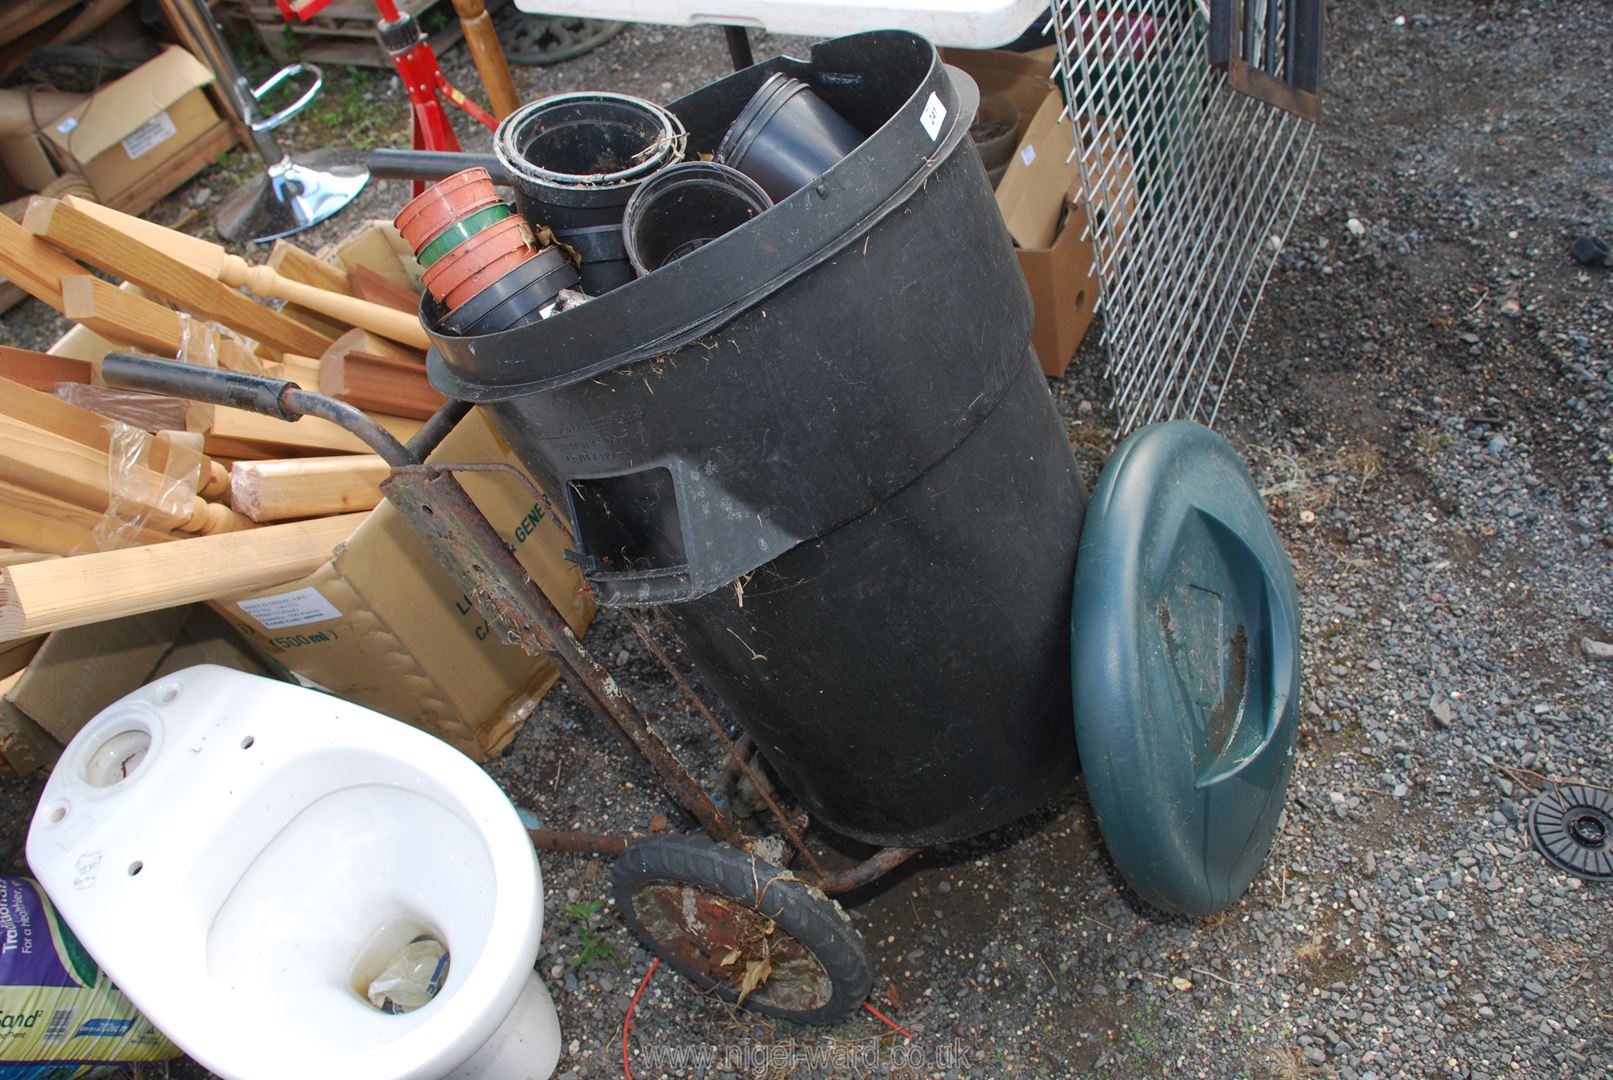 A wheel carrier (in need of attention), black bin and plant pots.